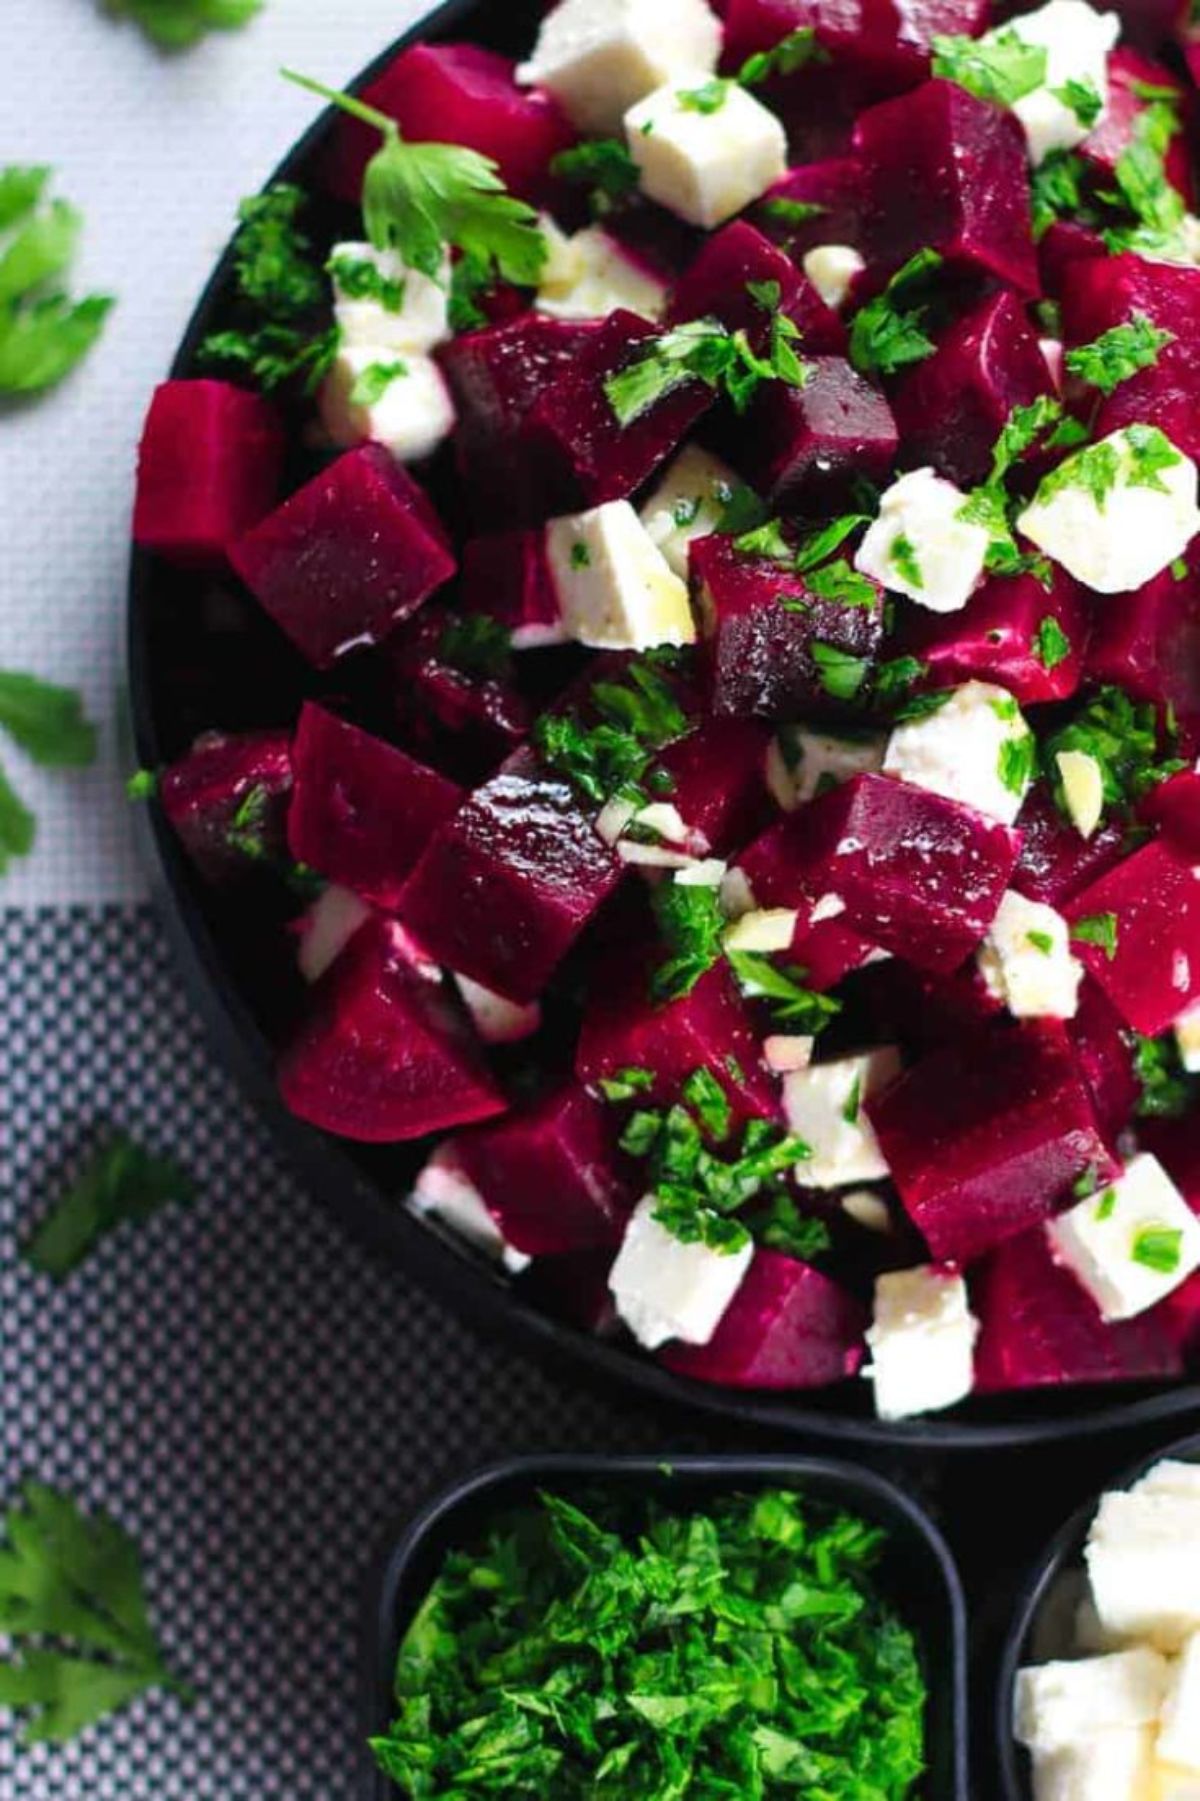 beets and feta cubes in large black bowl on blue table